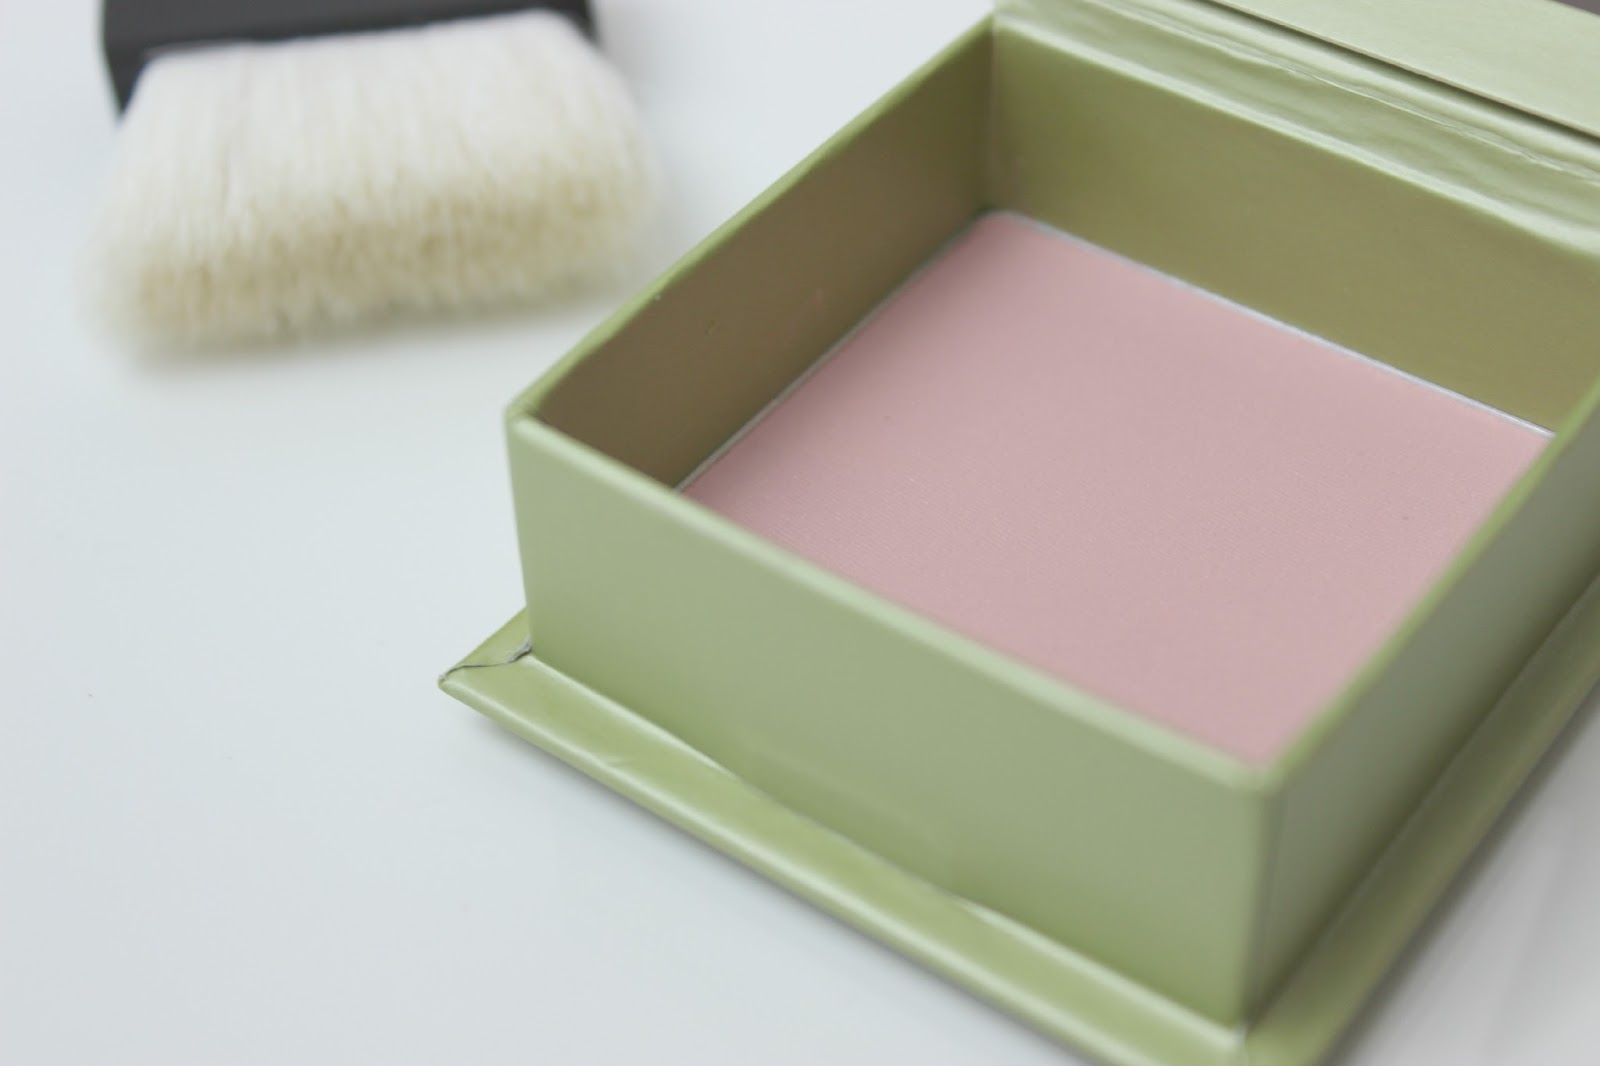 A picture of Benefit Dandelion Box Powder Brightening Face Powder